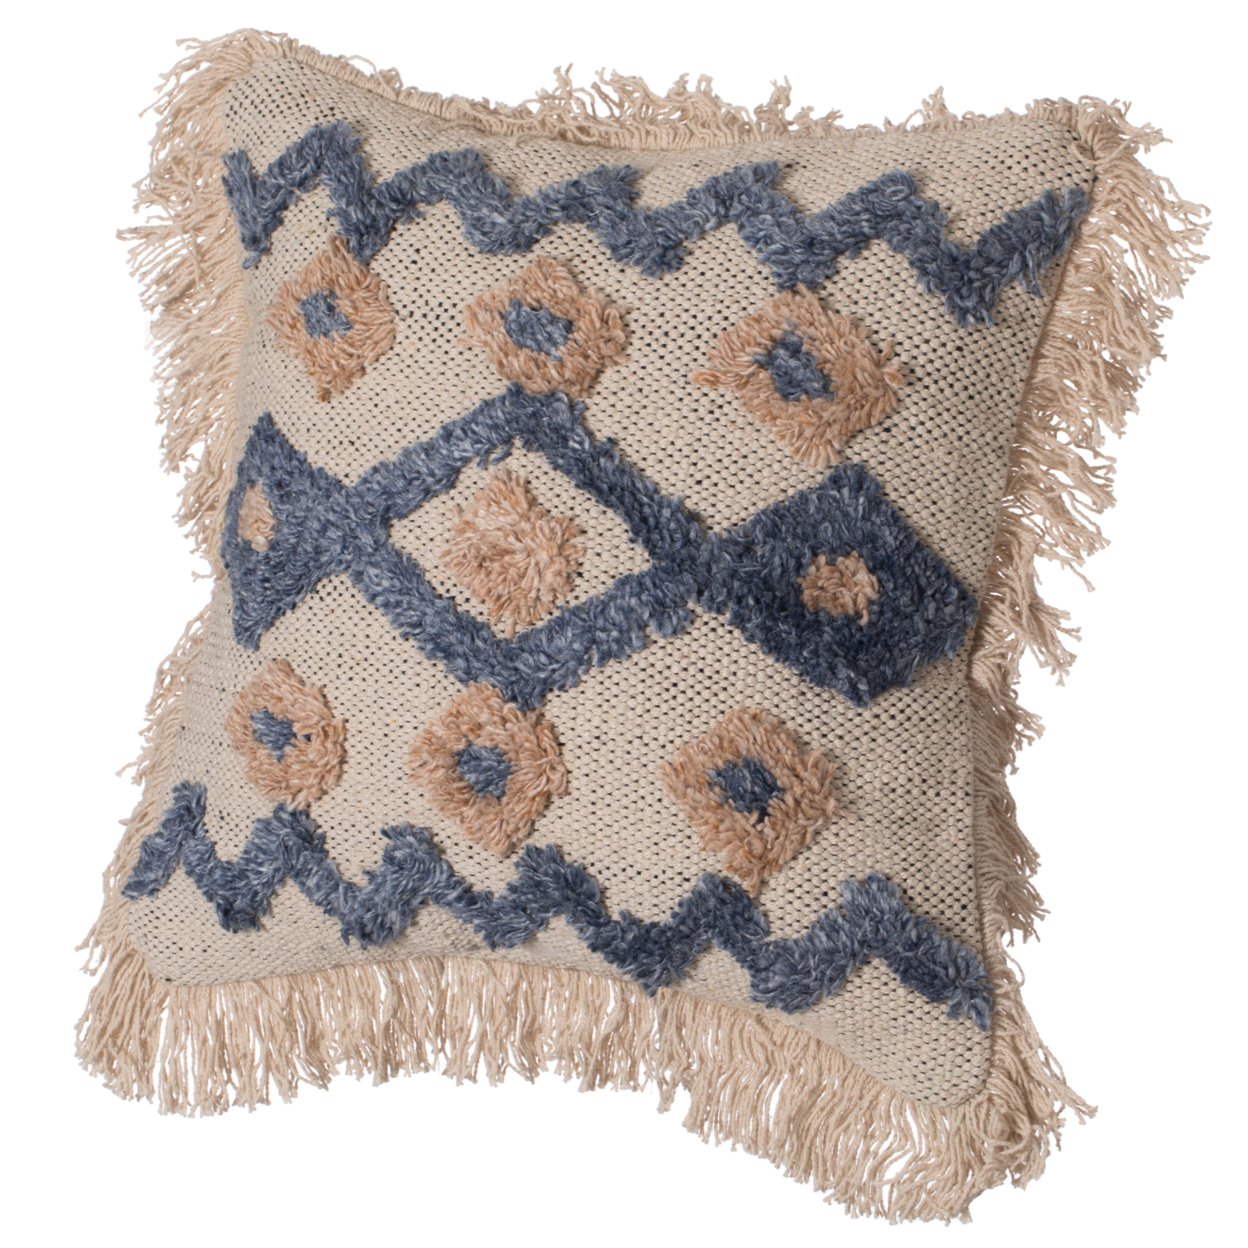 16" Handwoven Cotton & Silk Throw Fringed Pillow Cover Embossed Zig Zag & Crossed Lines Design - zig zag